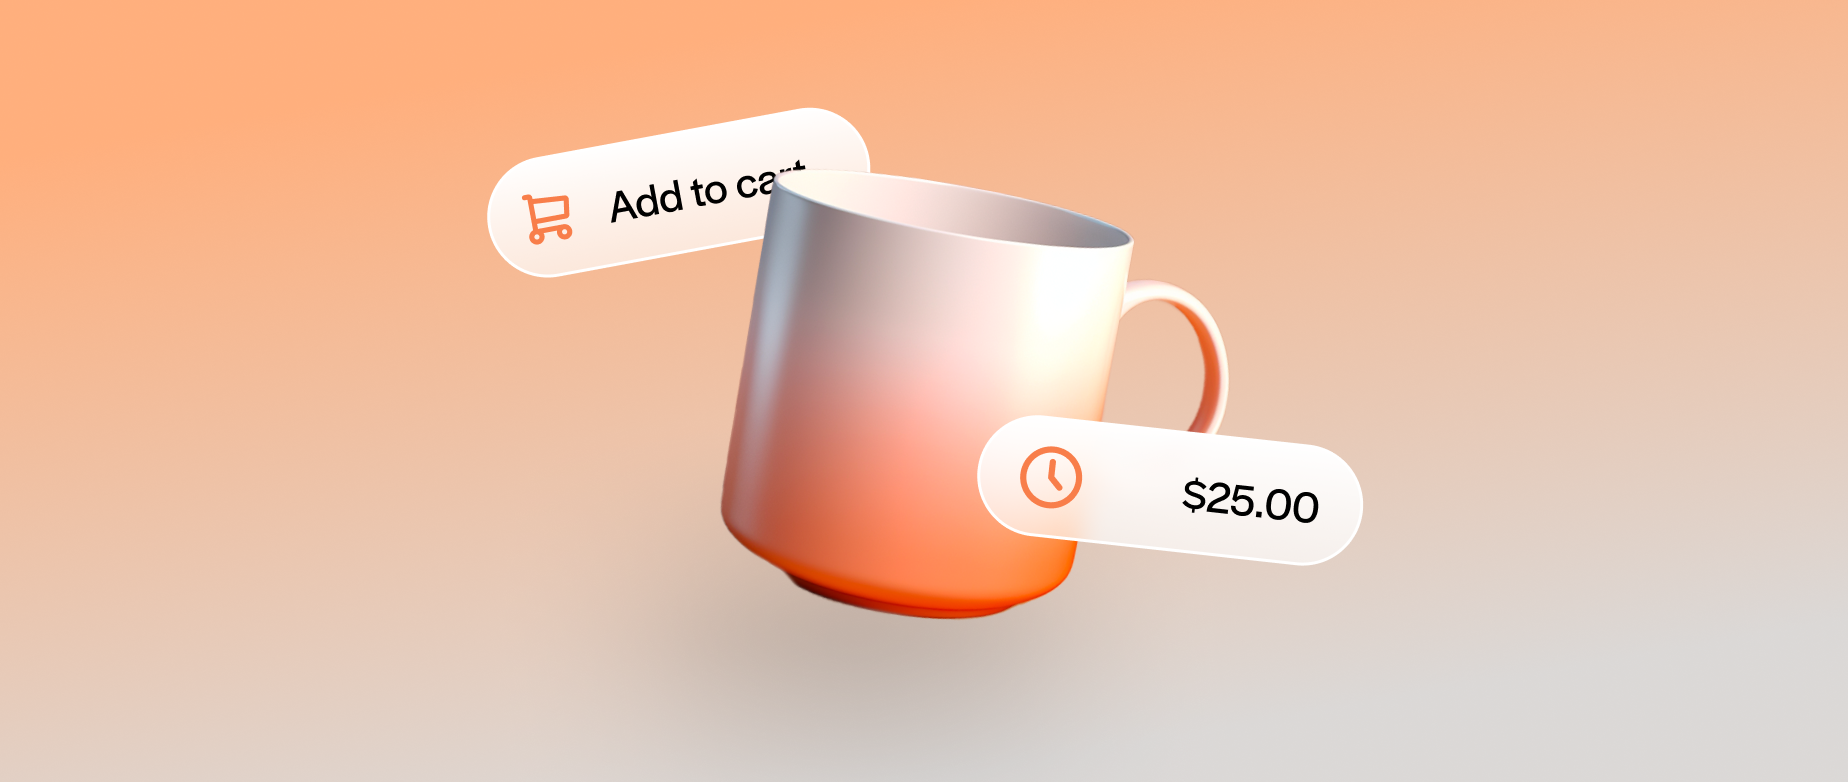 ombre coffee mug with clock icon + price and cart icon, indicating buy now pay later